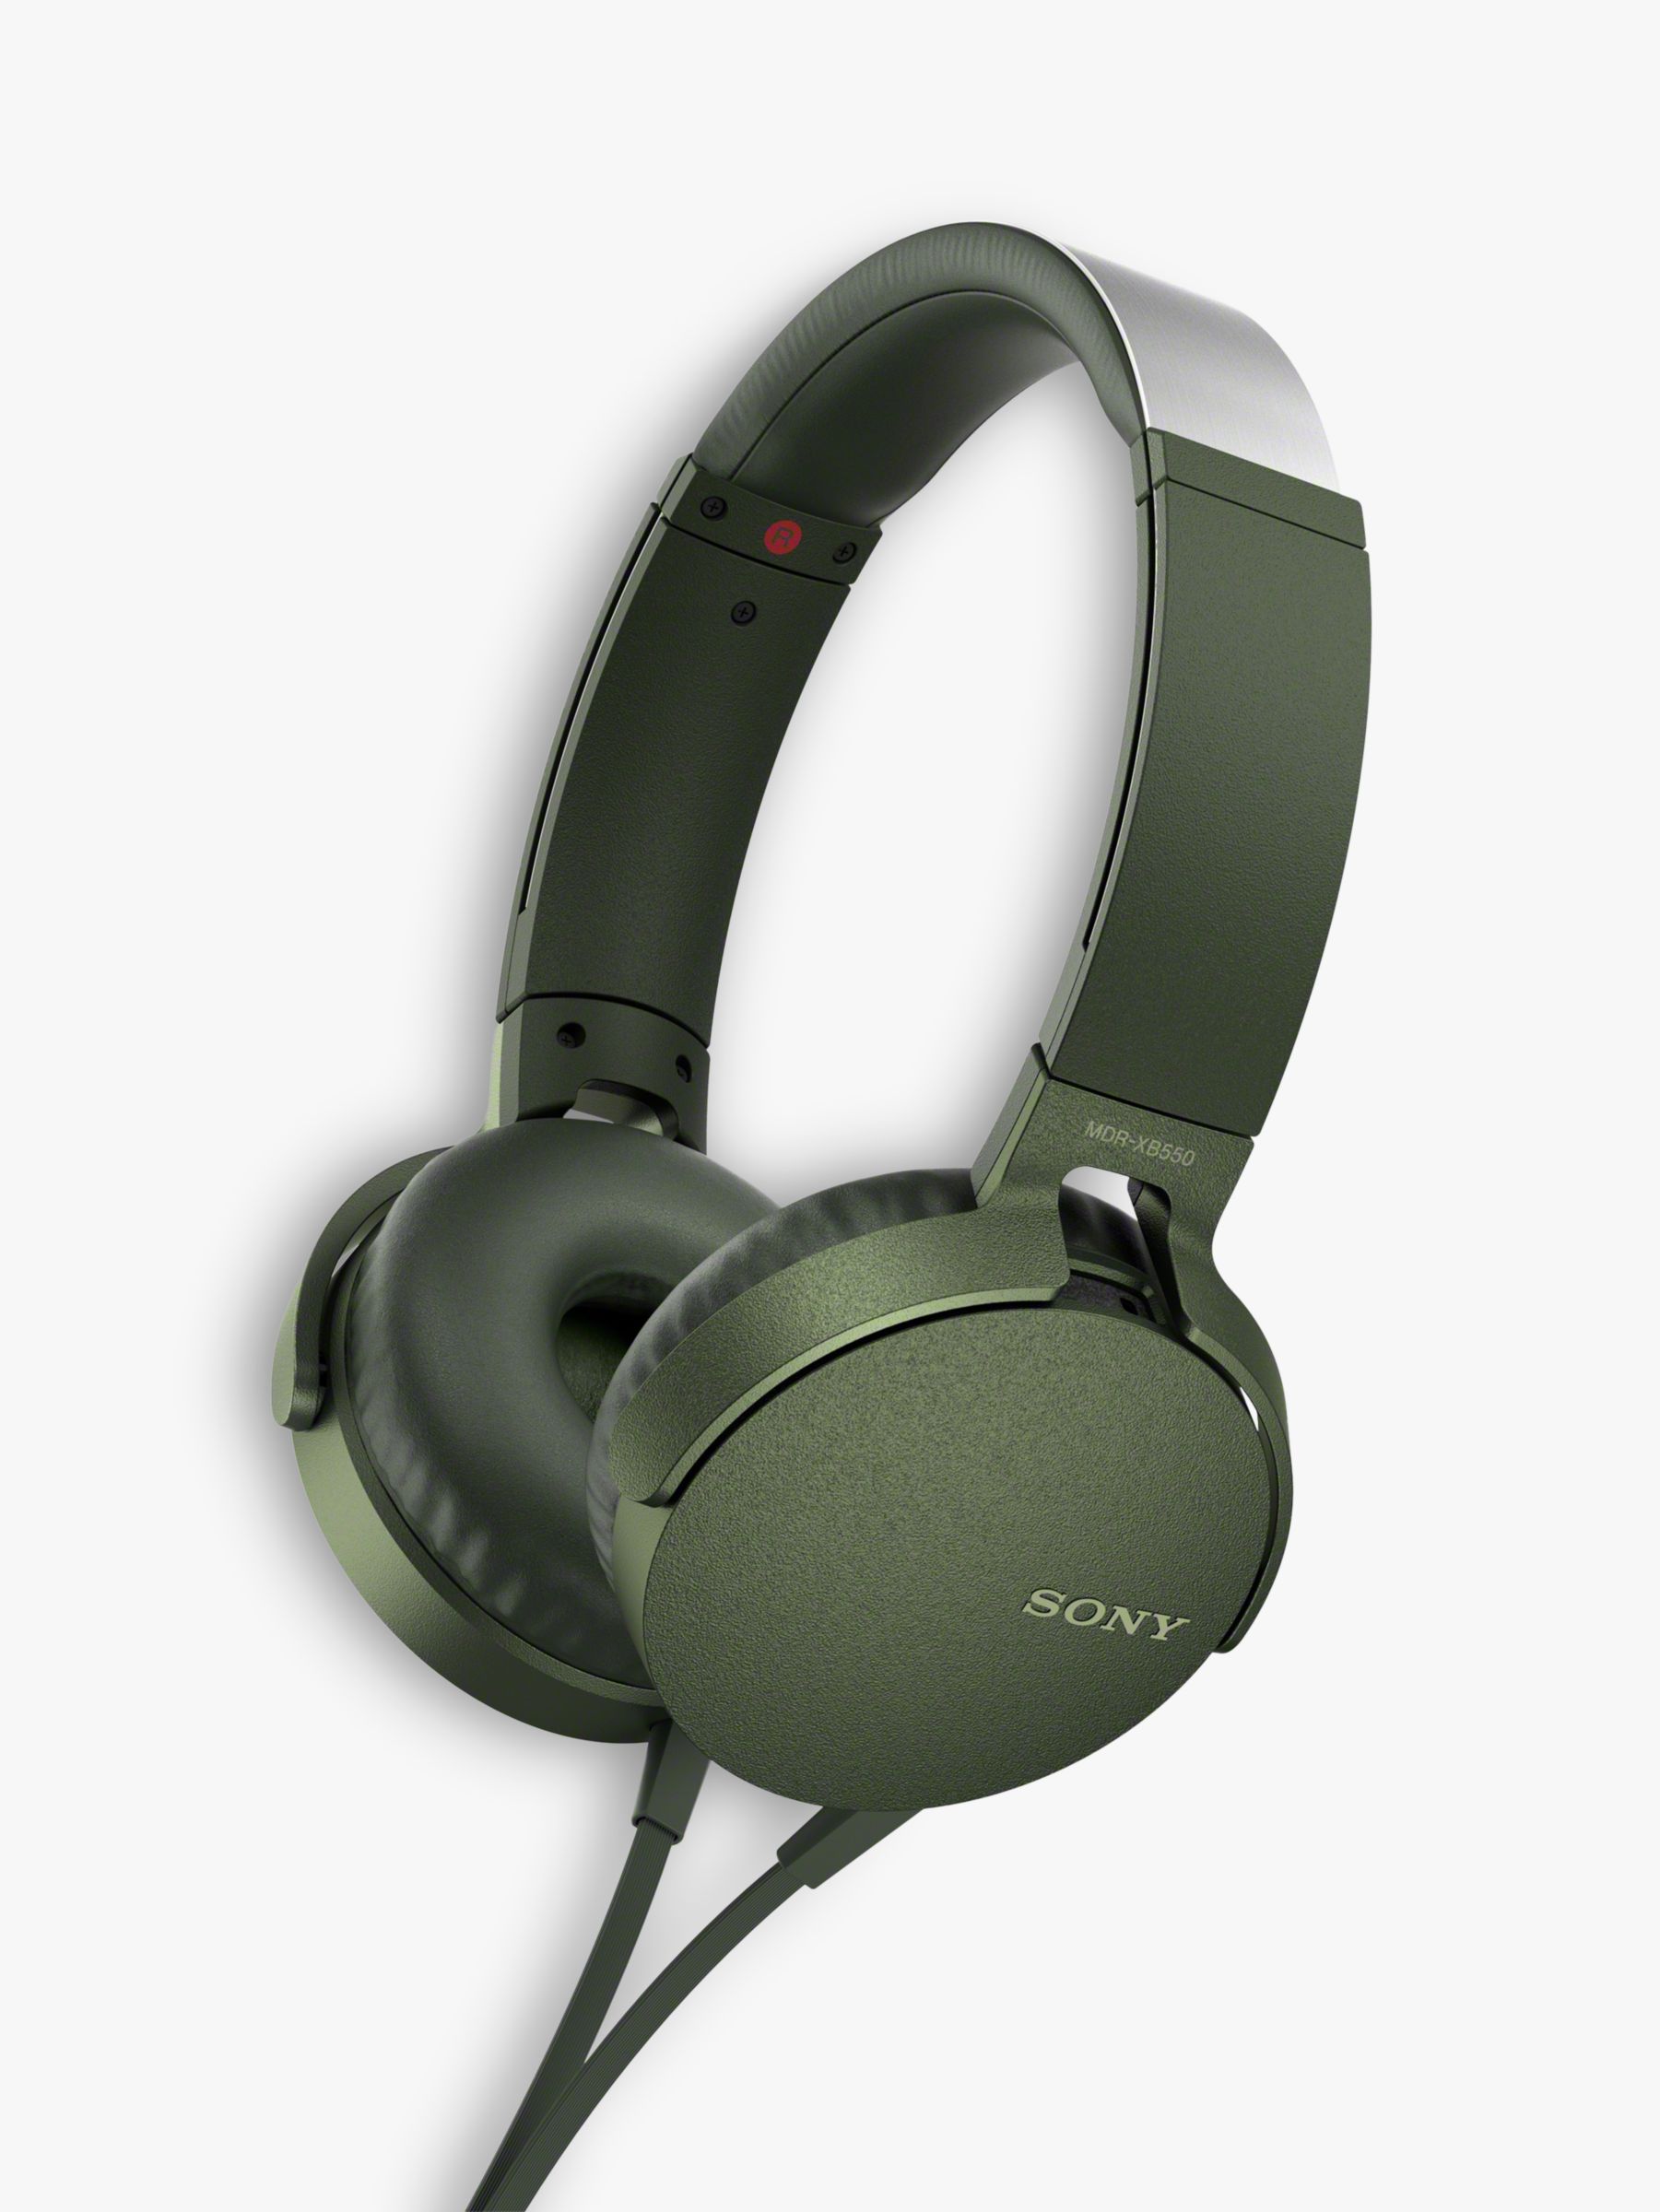 Sony MDR-XB550AP Extra Bass On-Ear Headphones with Mic/Remote Review